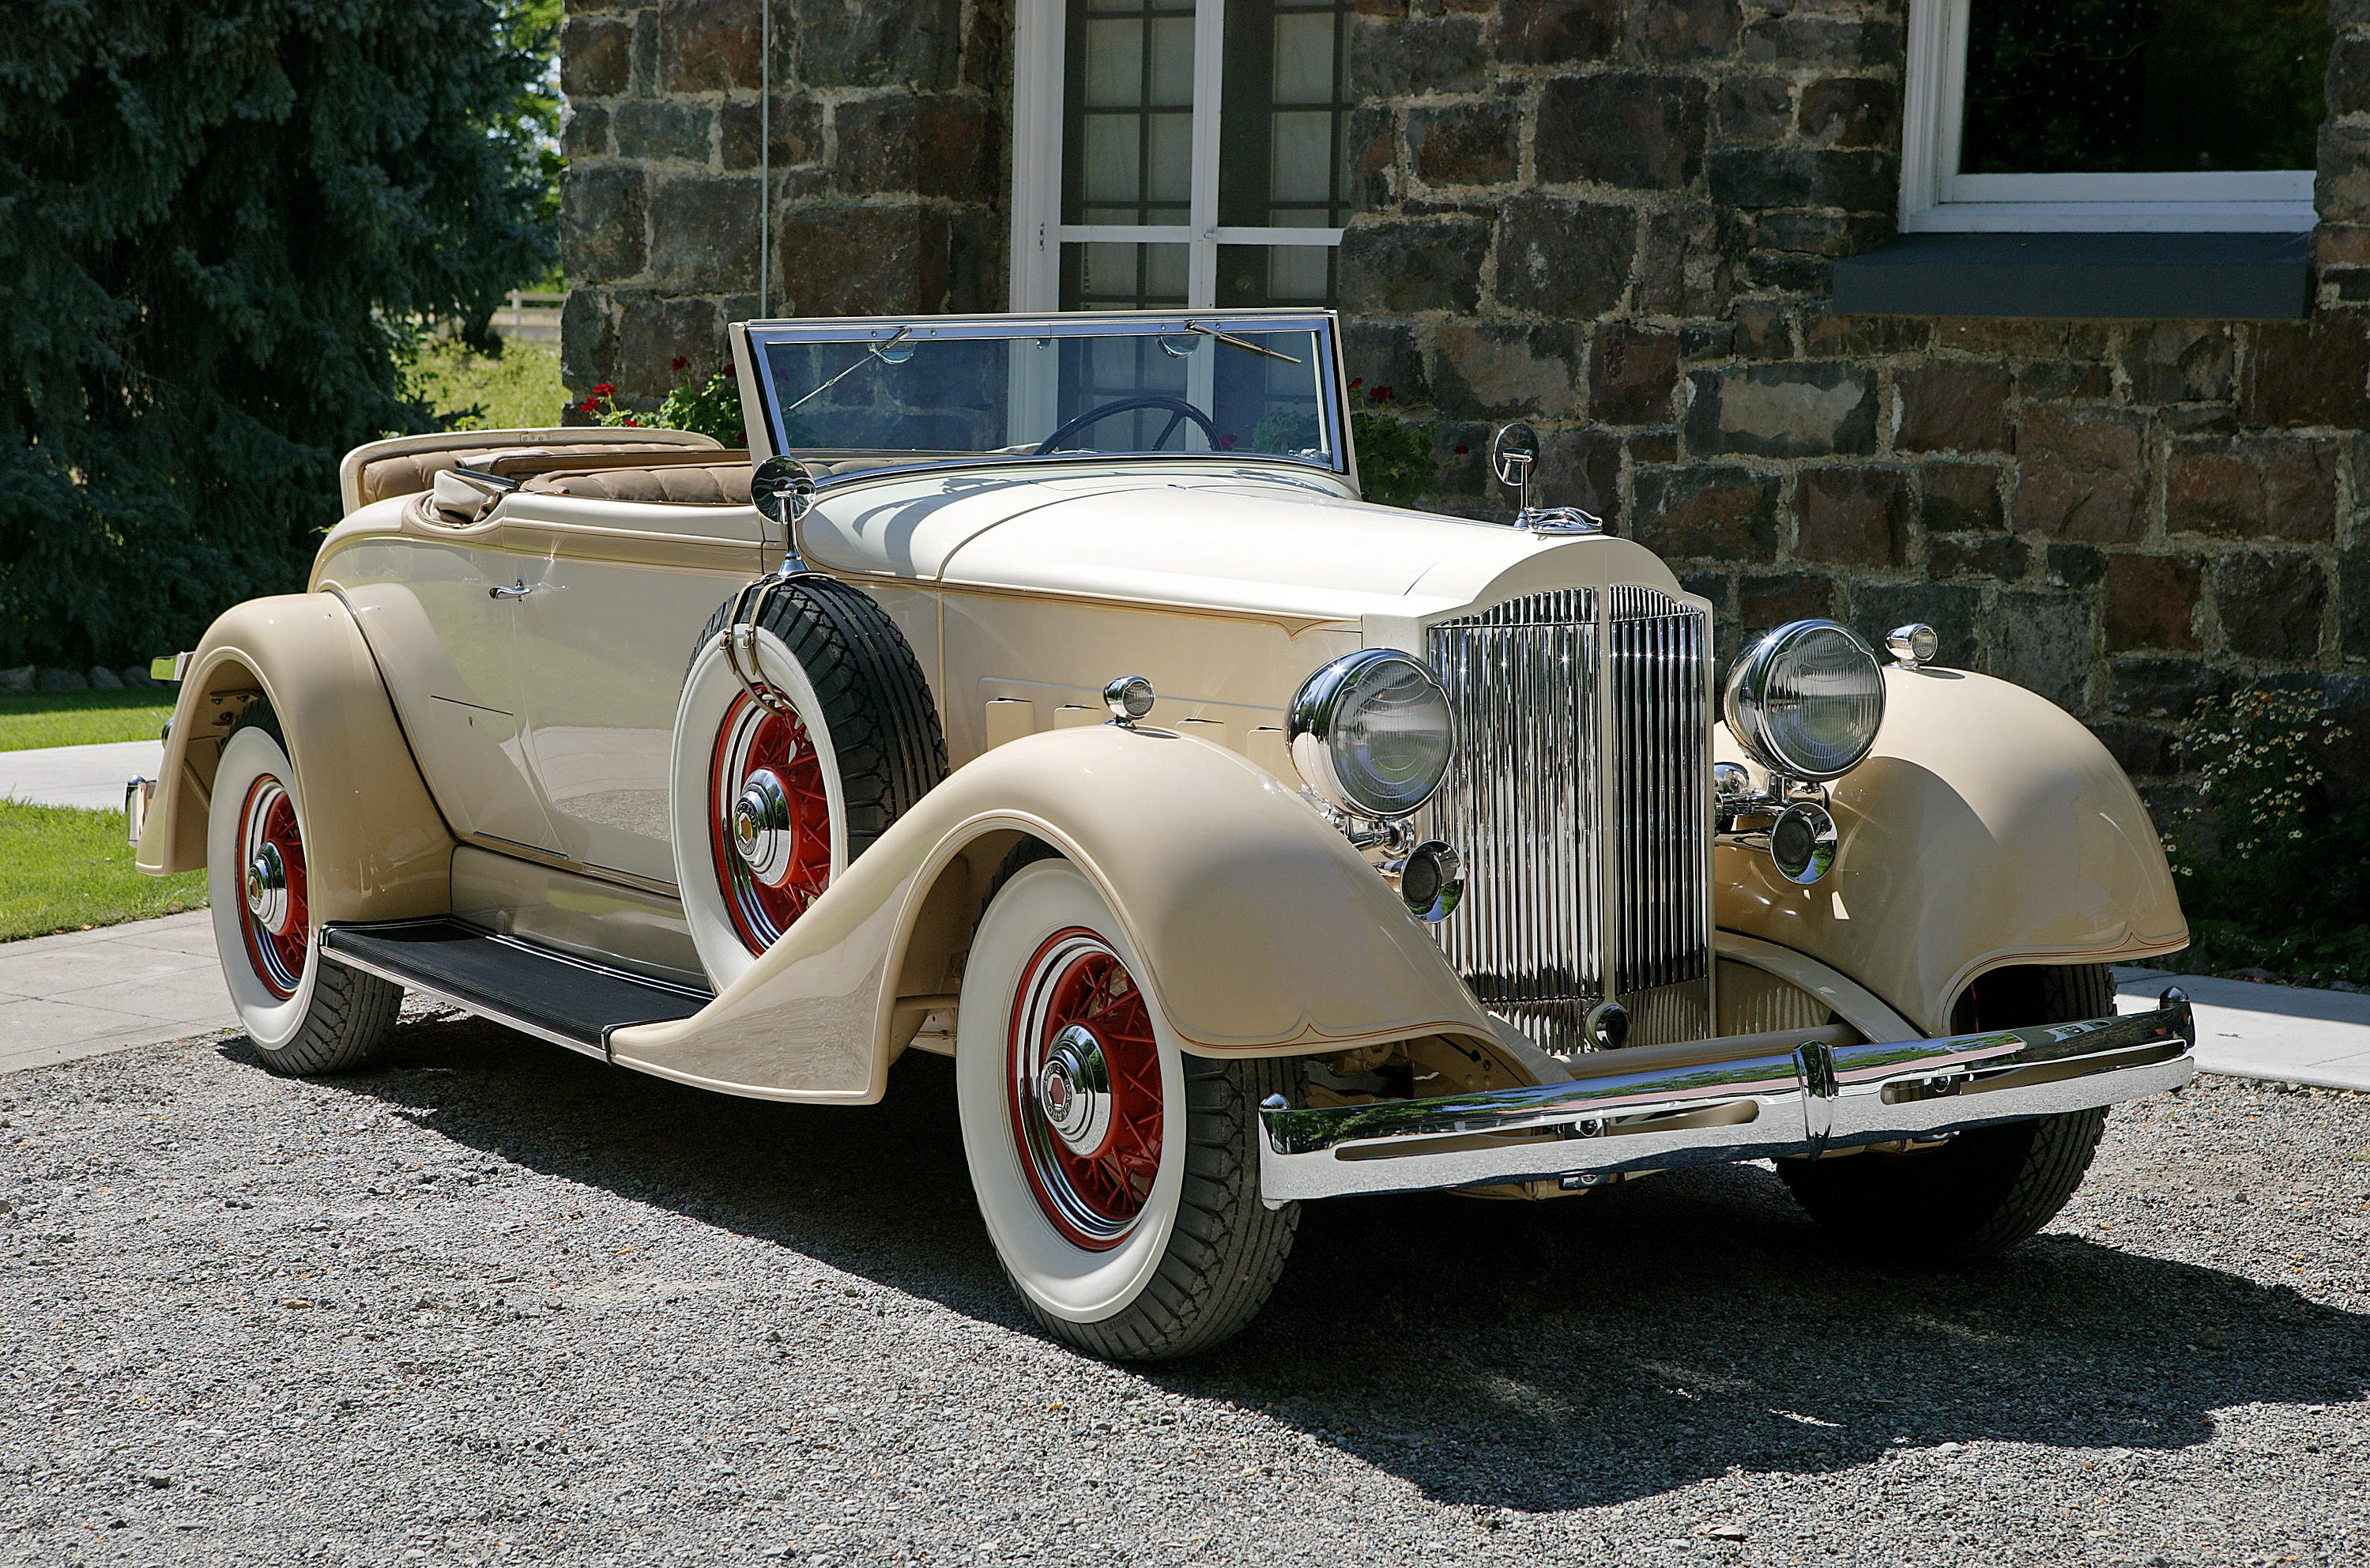 Bonhams : 1934 Packard 1101 Standard Eight Coupe Roadster Chassis no. 719203